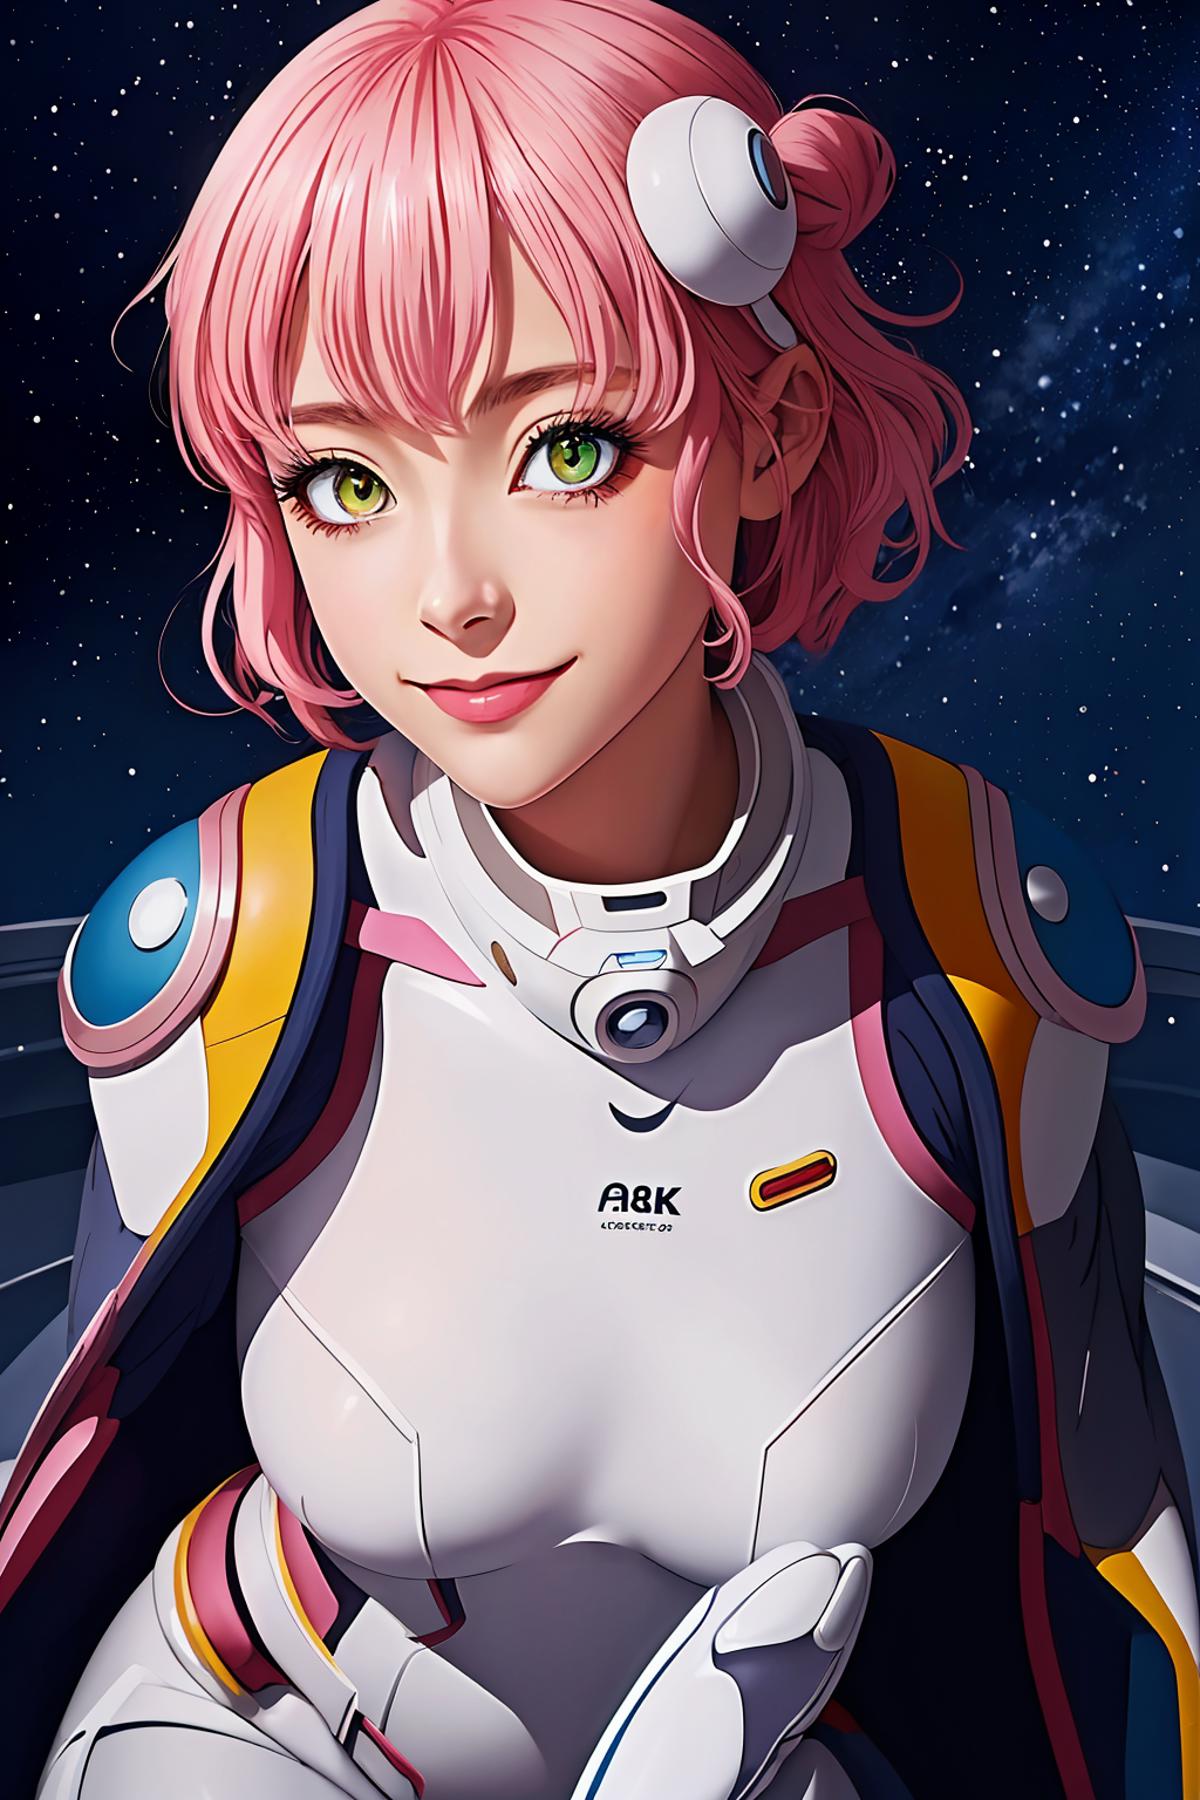 Aries Spring (Astra Lost in Space / Kanata no Astra) image by allureAI